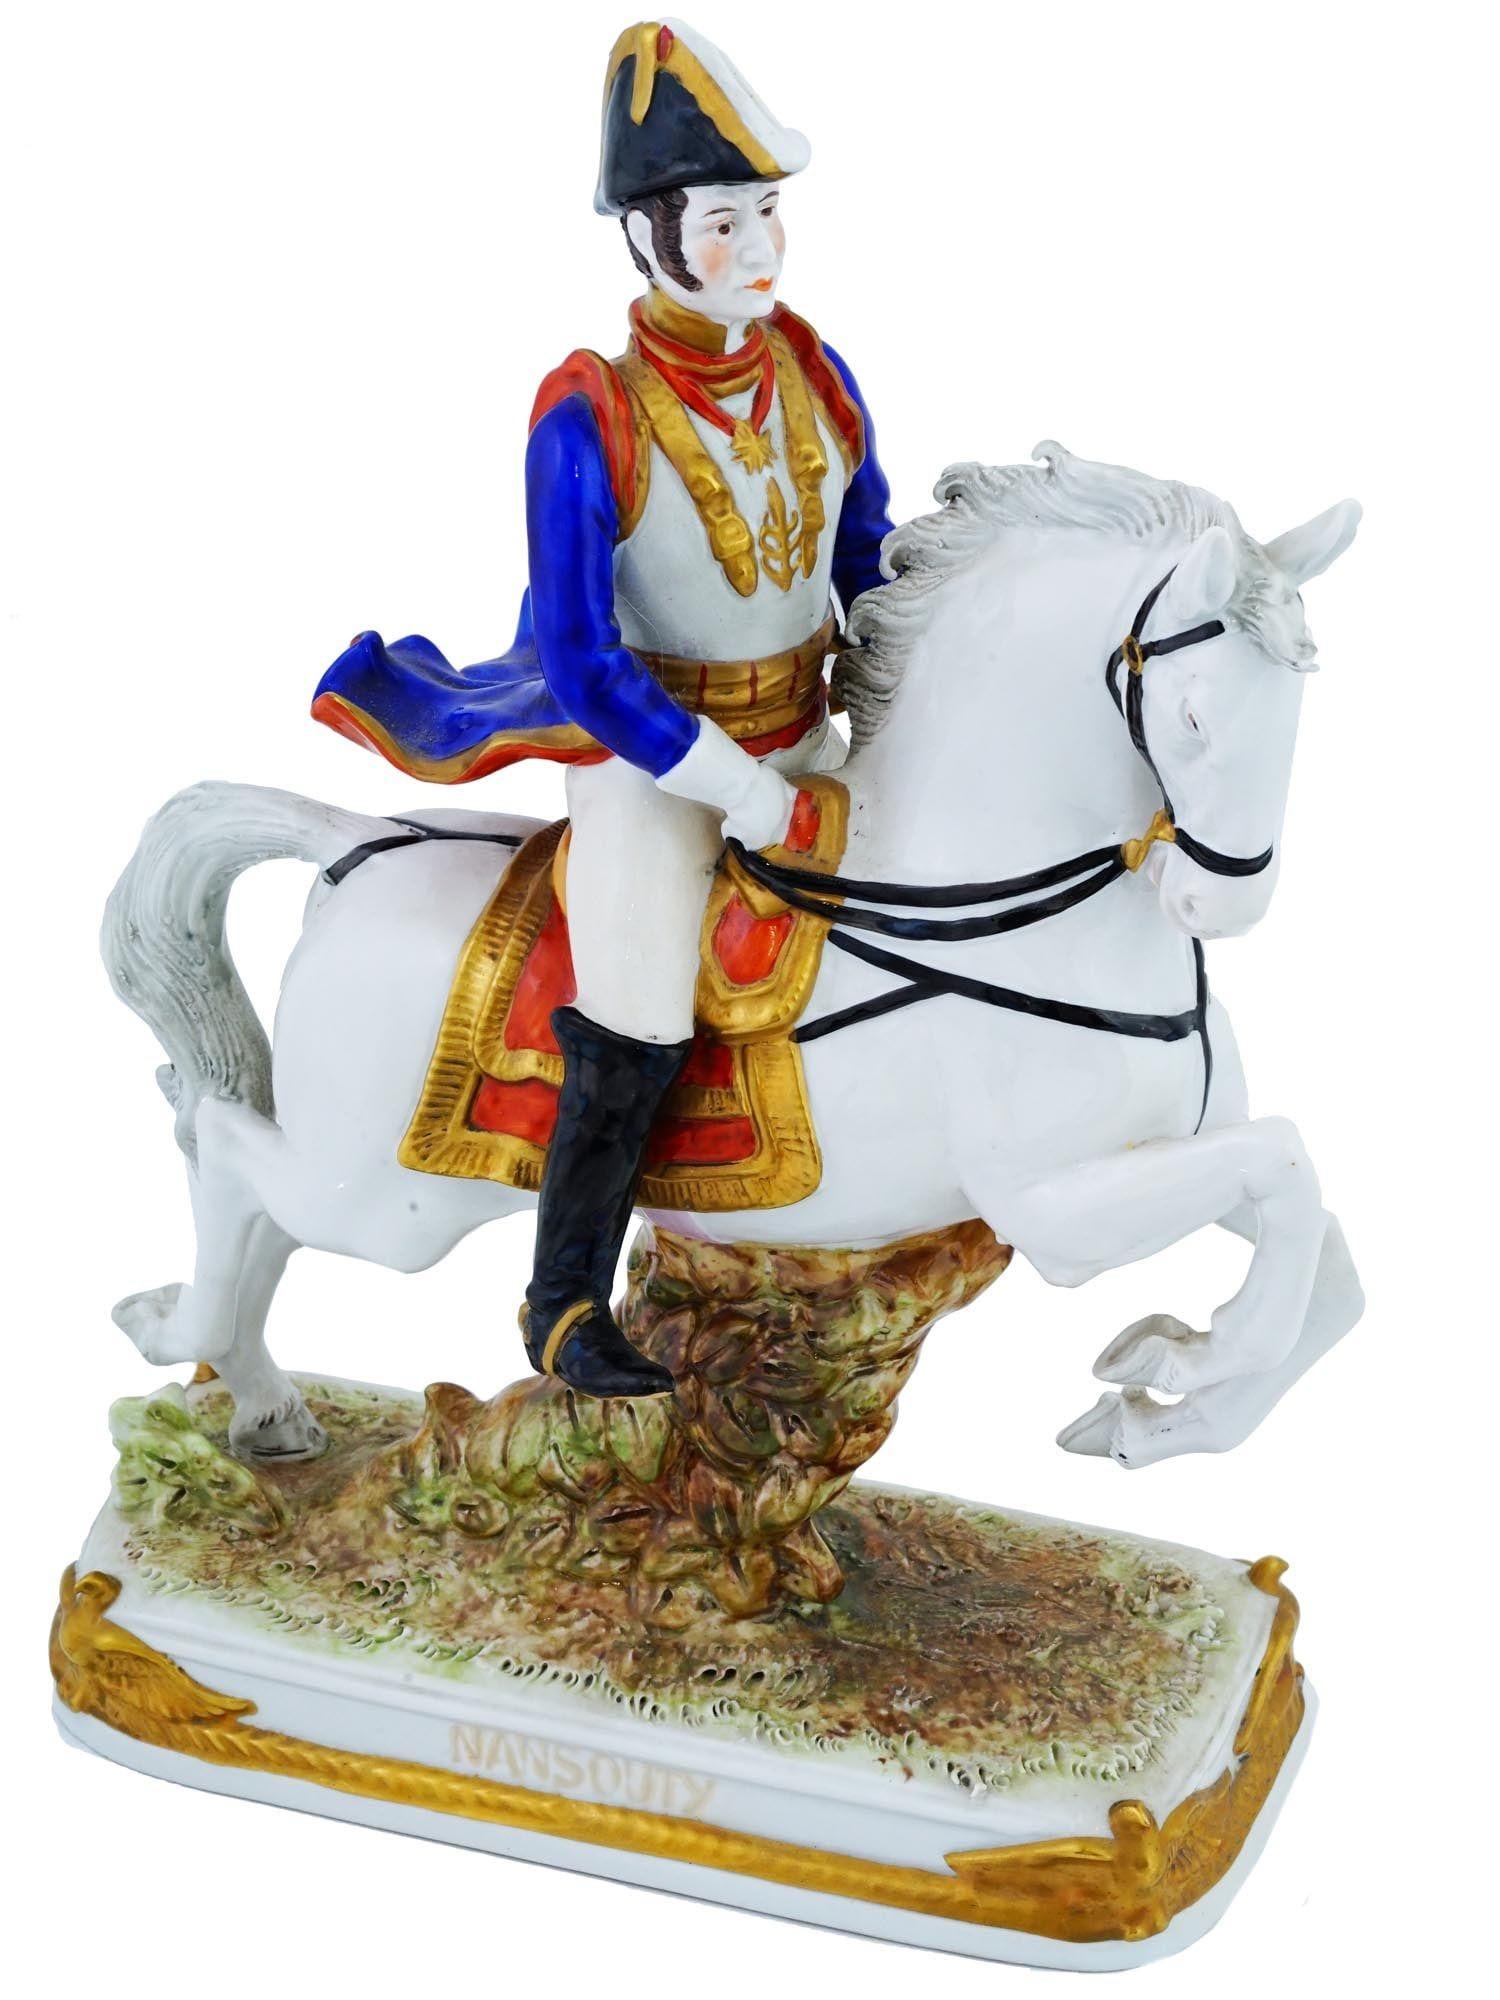 Vintage (early 20th century) German porcelain figurine depicting the French Napoleonic army officer on a white horse, Etienne Marie Antoine Champion, comte de Nansouty, 1768 to 1815. From the Kister Porcelain Manufactory of Scheibe Alsbach. 